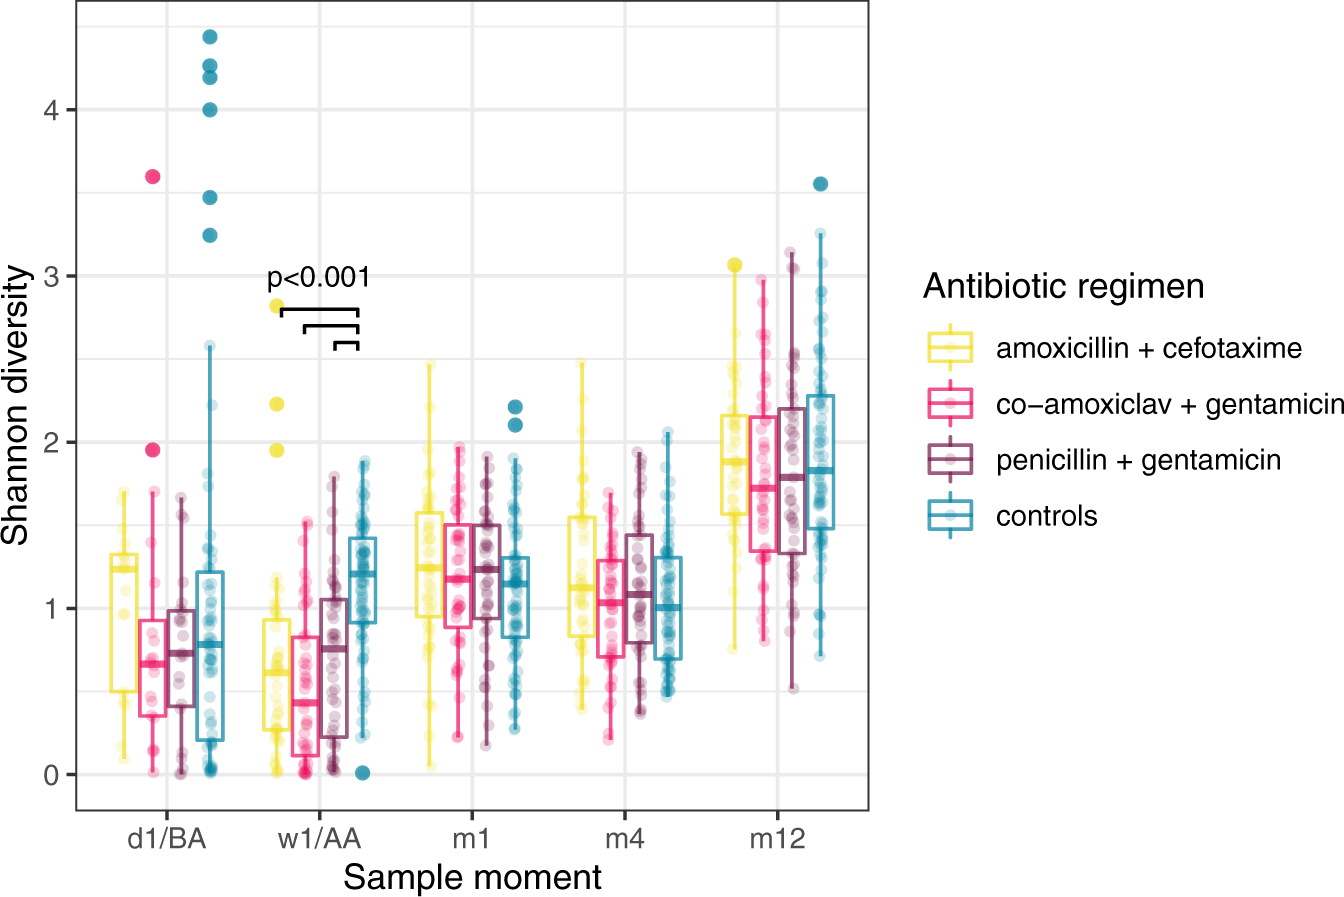 Effects of early-life antibiotics on the developing infant gut microbiome  and resistome: a randomized trial | Nature Communications